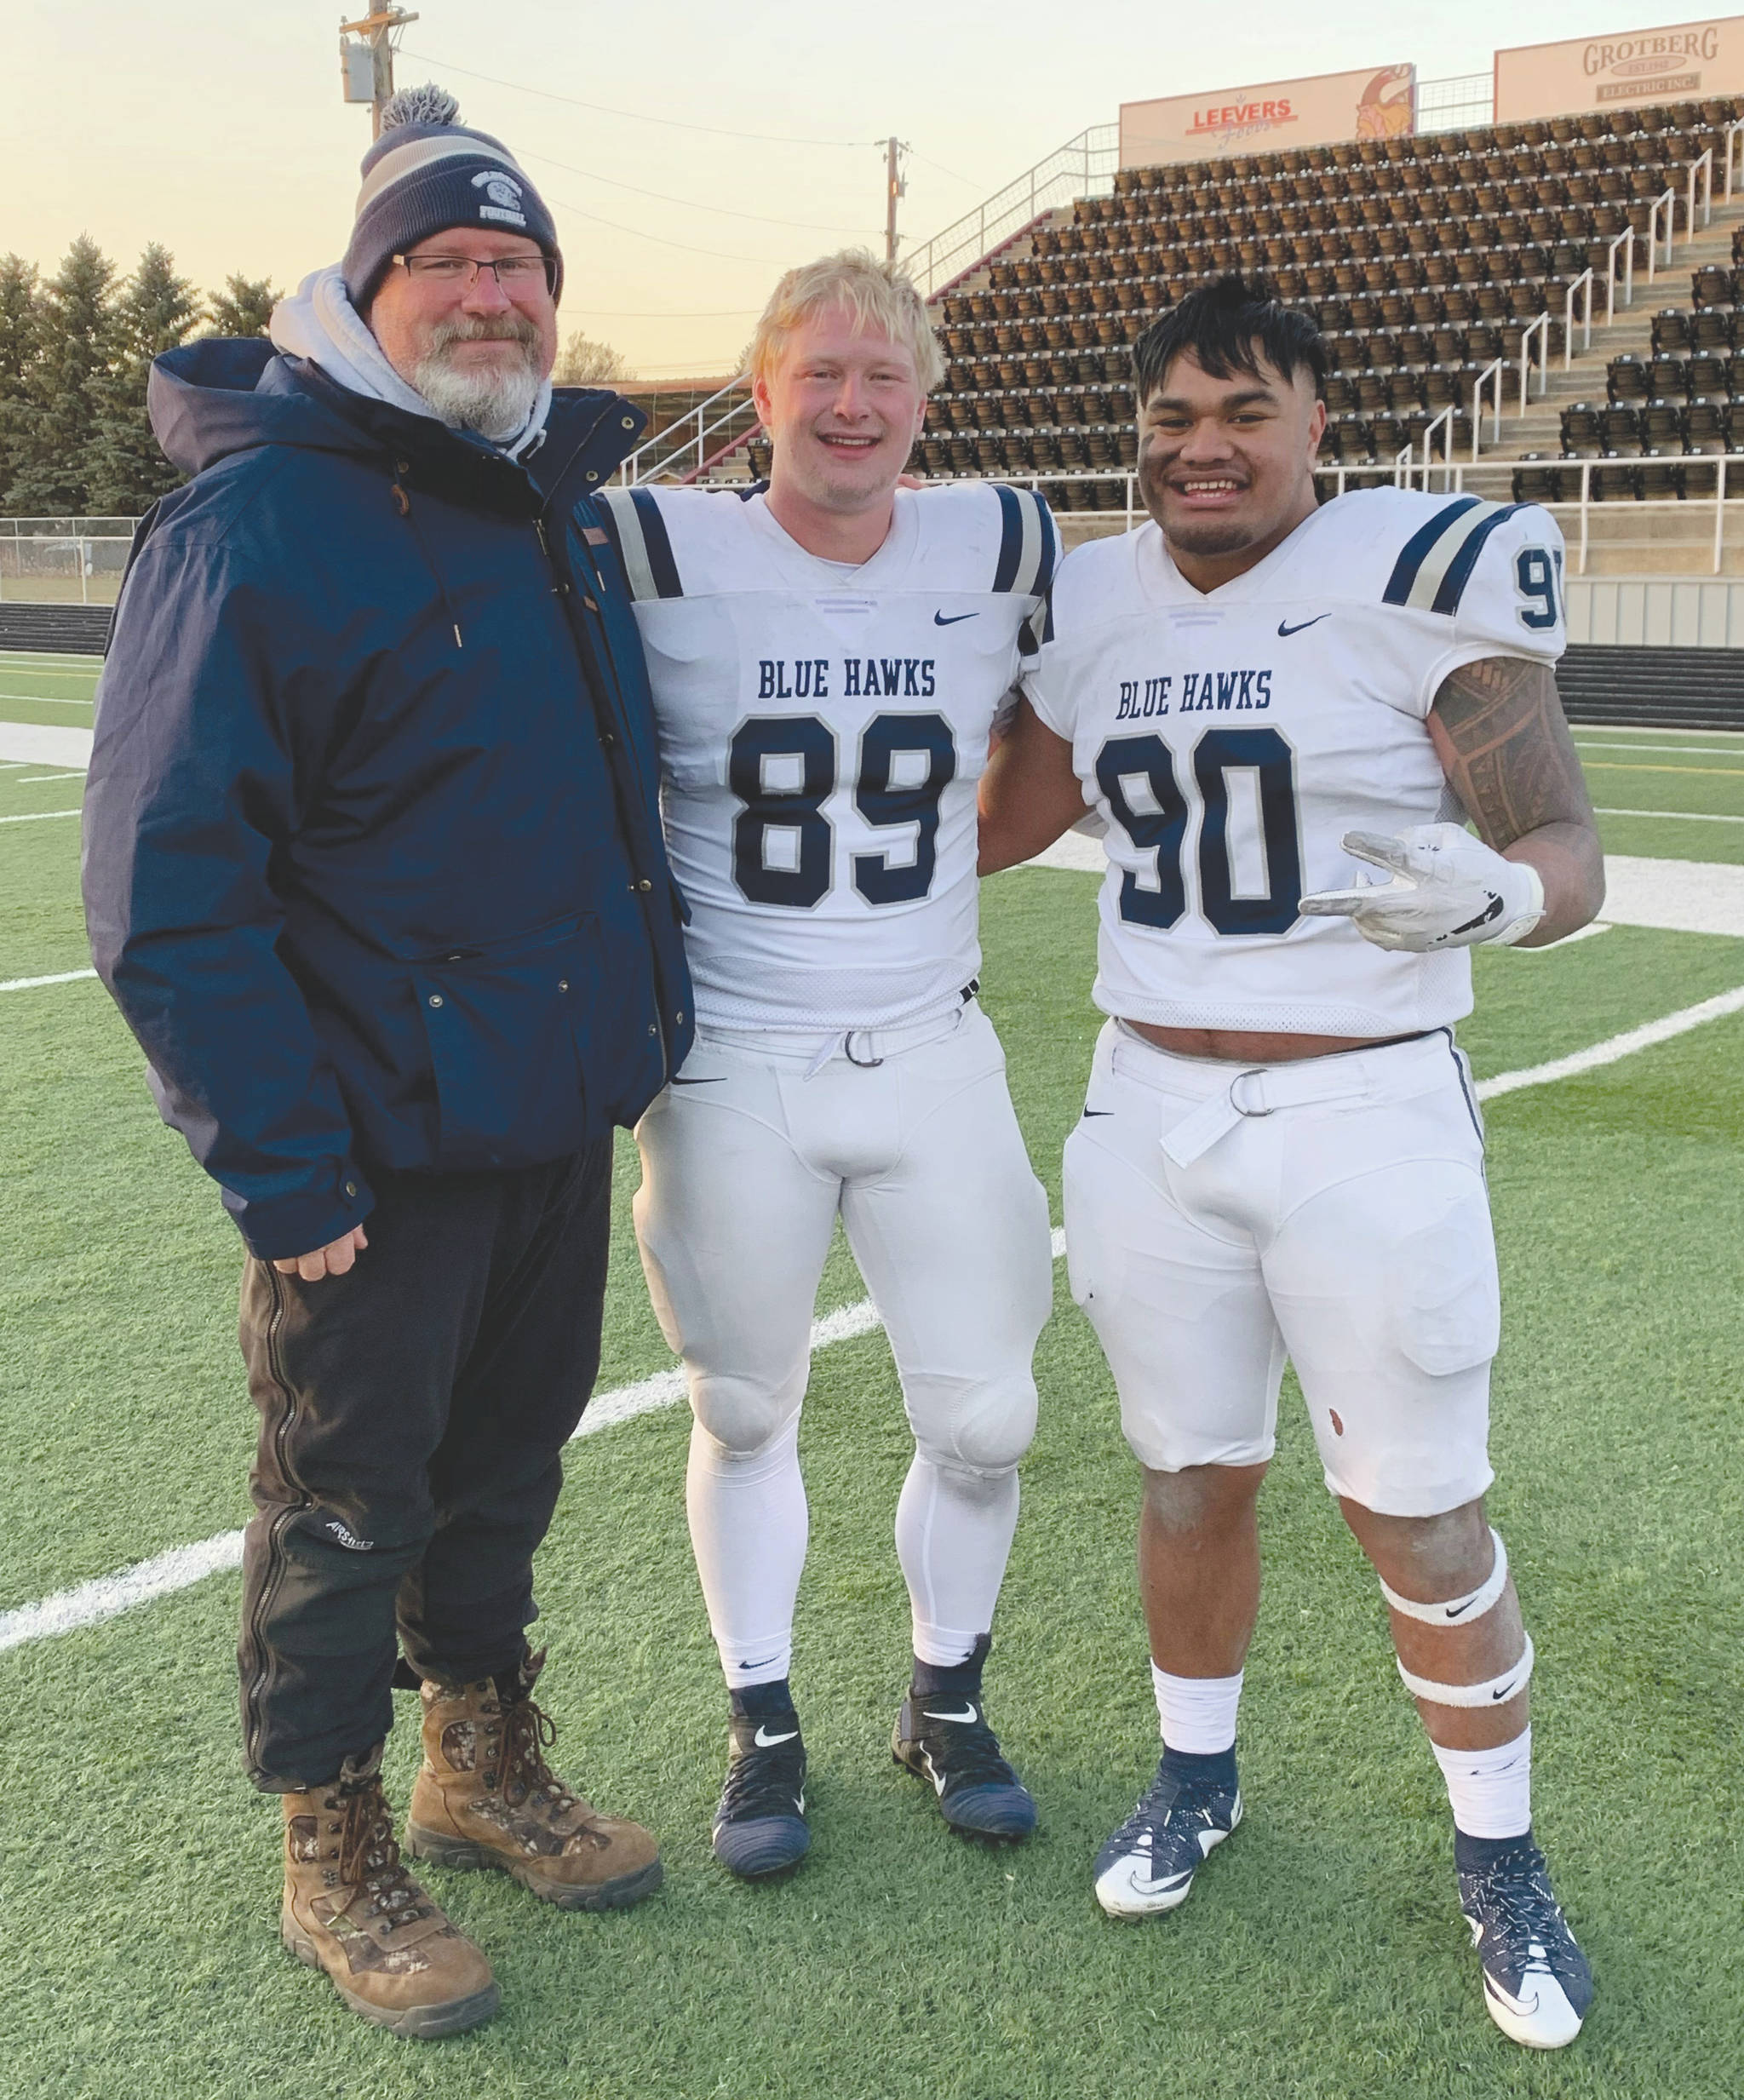 Soldotna High School head football coach Galen Brantley Jr. poses with former players Galen Brantley III and Aaron Faletoi. Brantley III and Faletoi helped Dickinson State in Dickinson, South Dakota, to an undefeated regular season. (Photo provided by Galen Brantley Jr.)